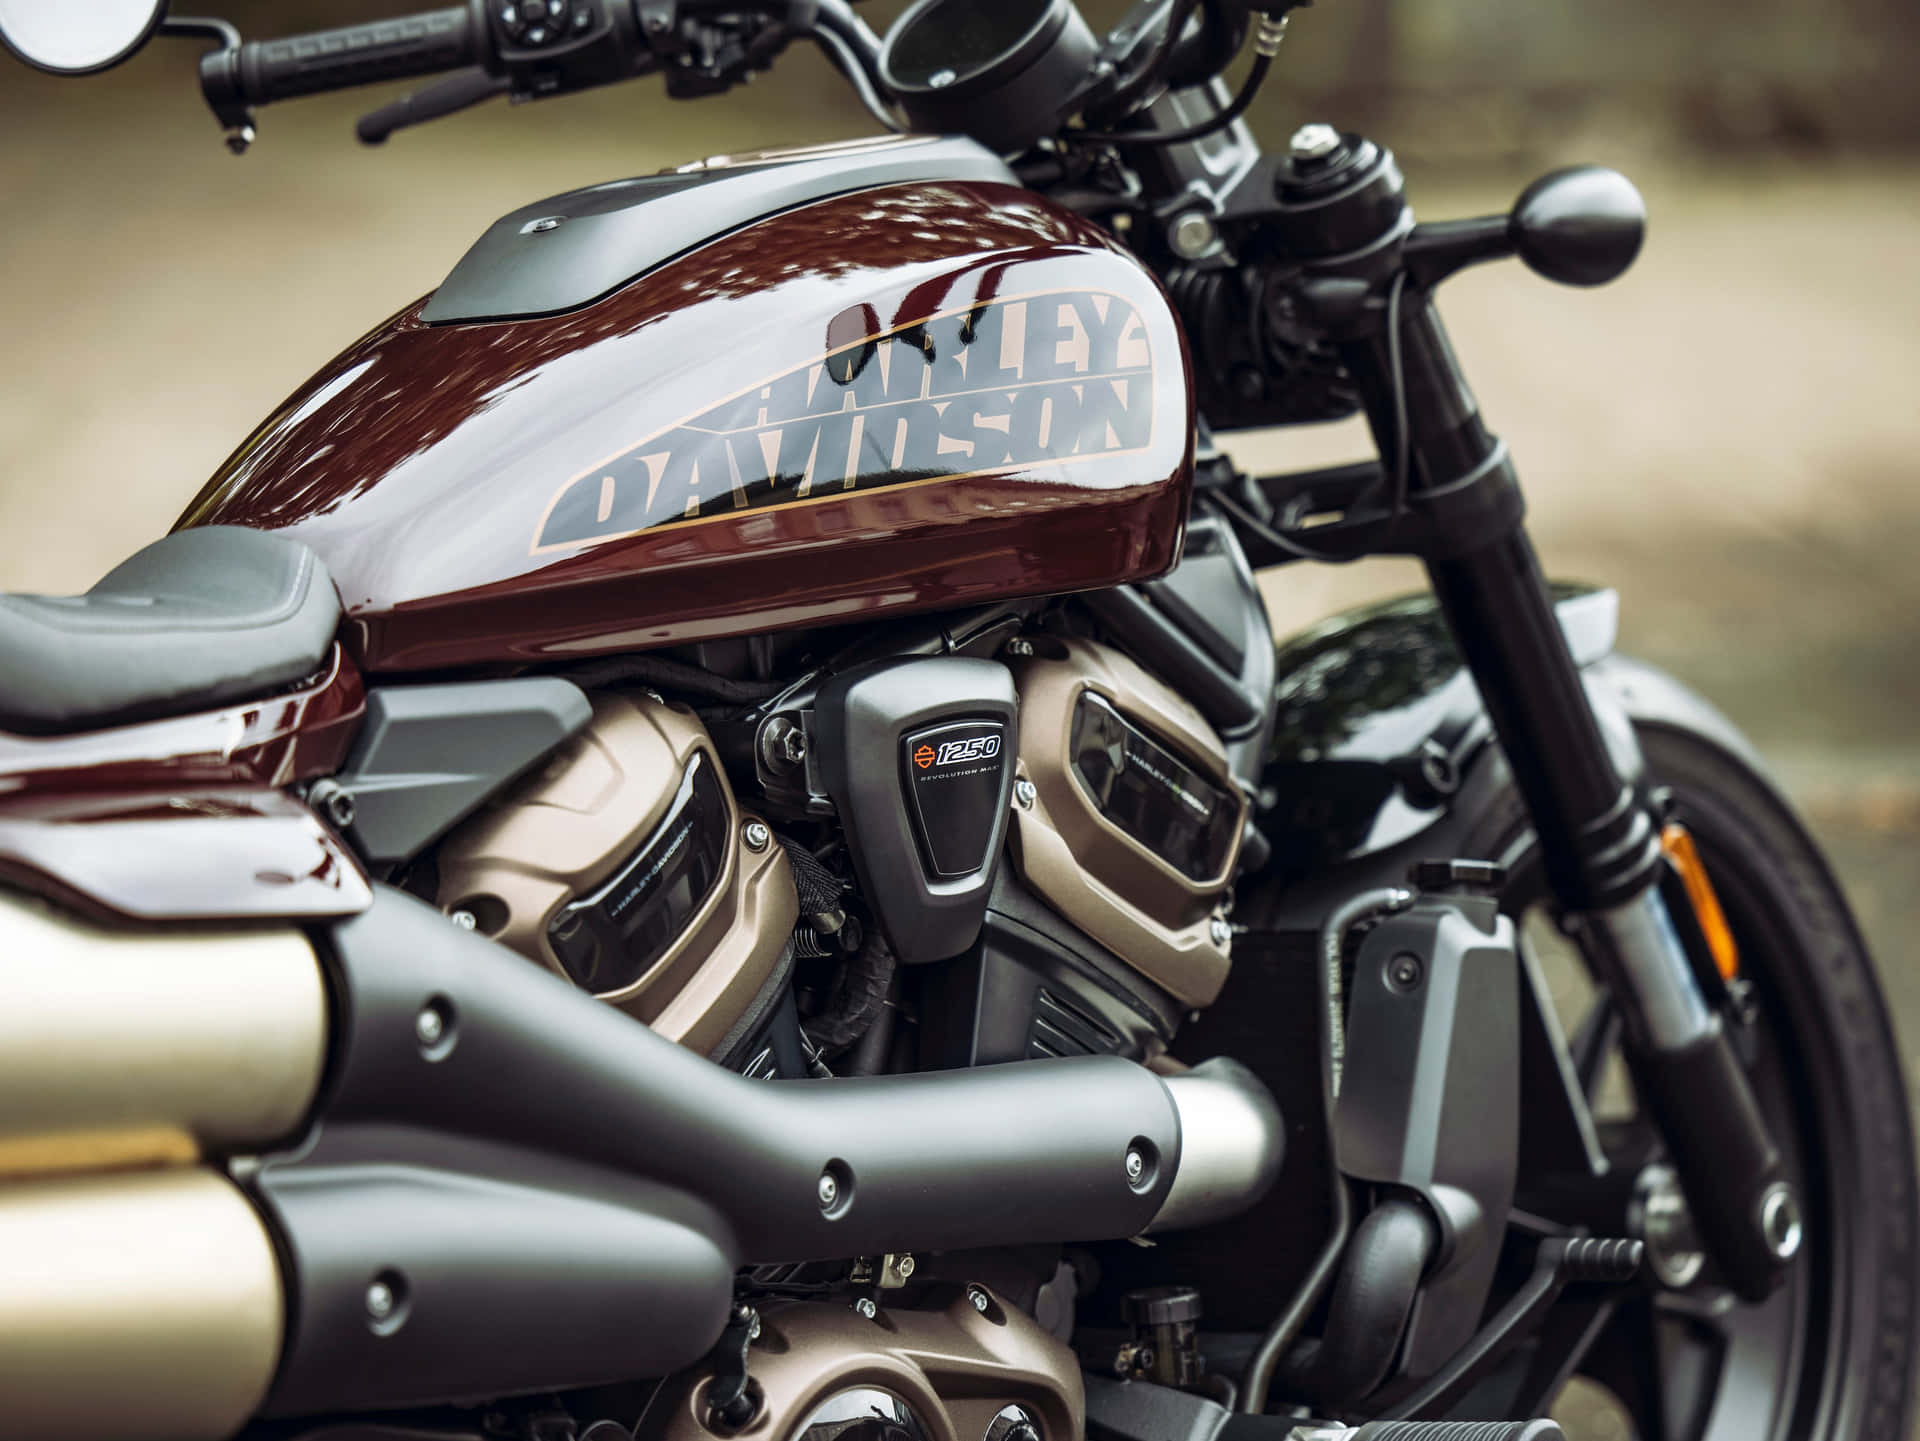 "Take a Ride on the Wild Side with Harley Davidson"